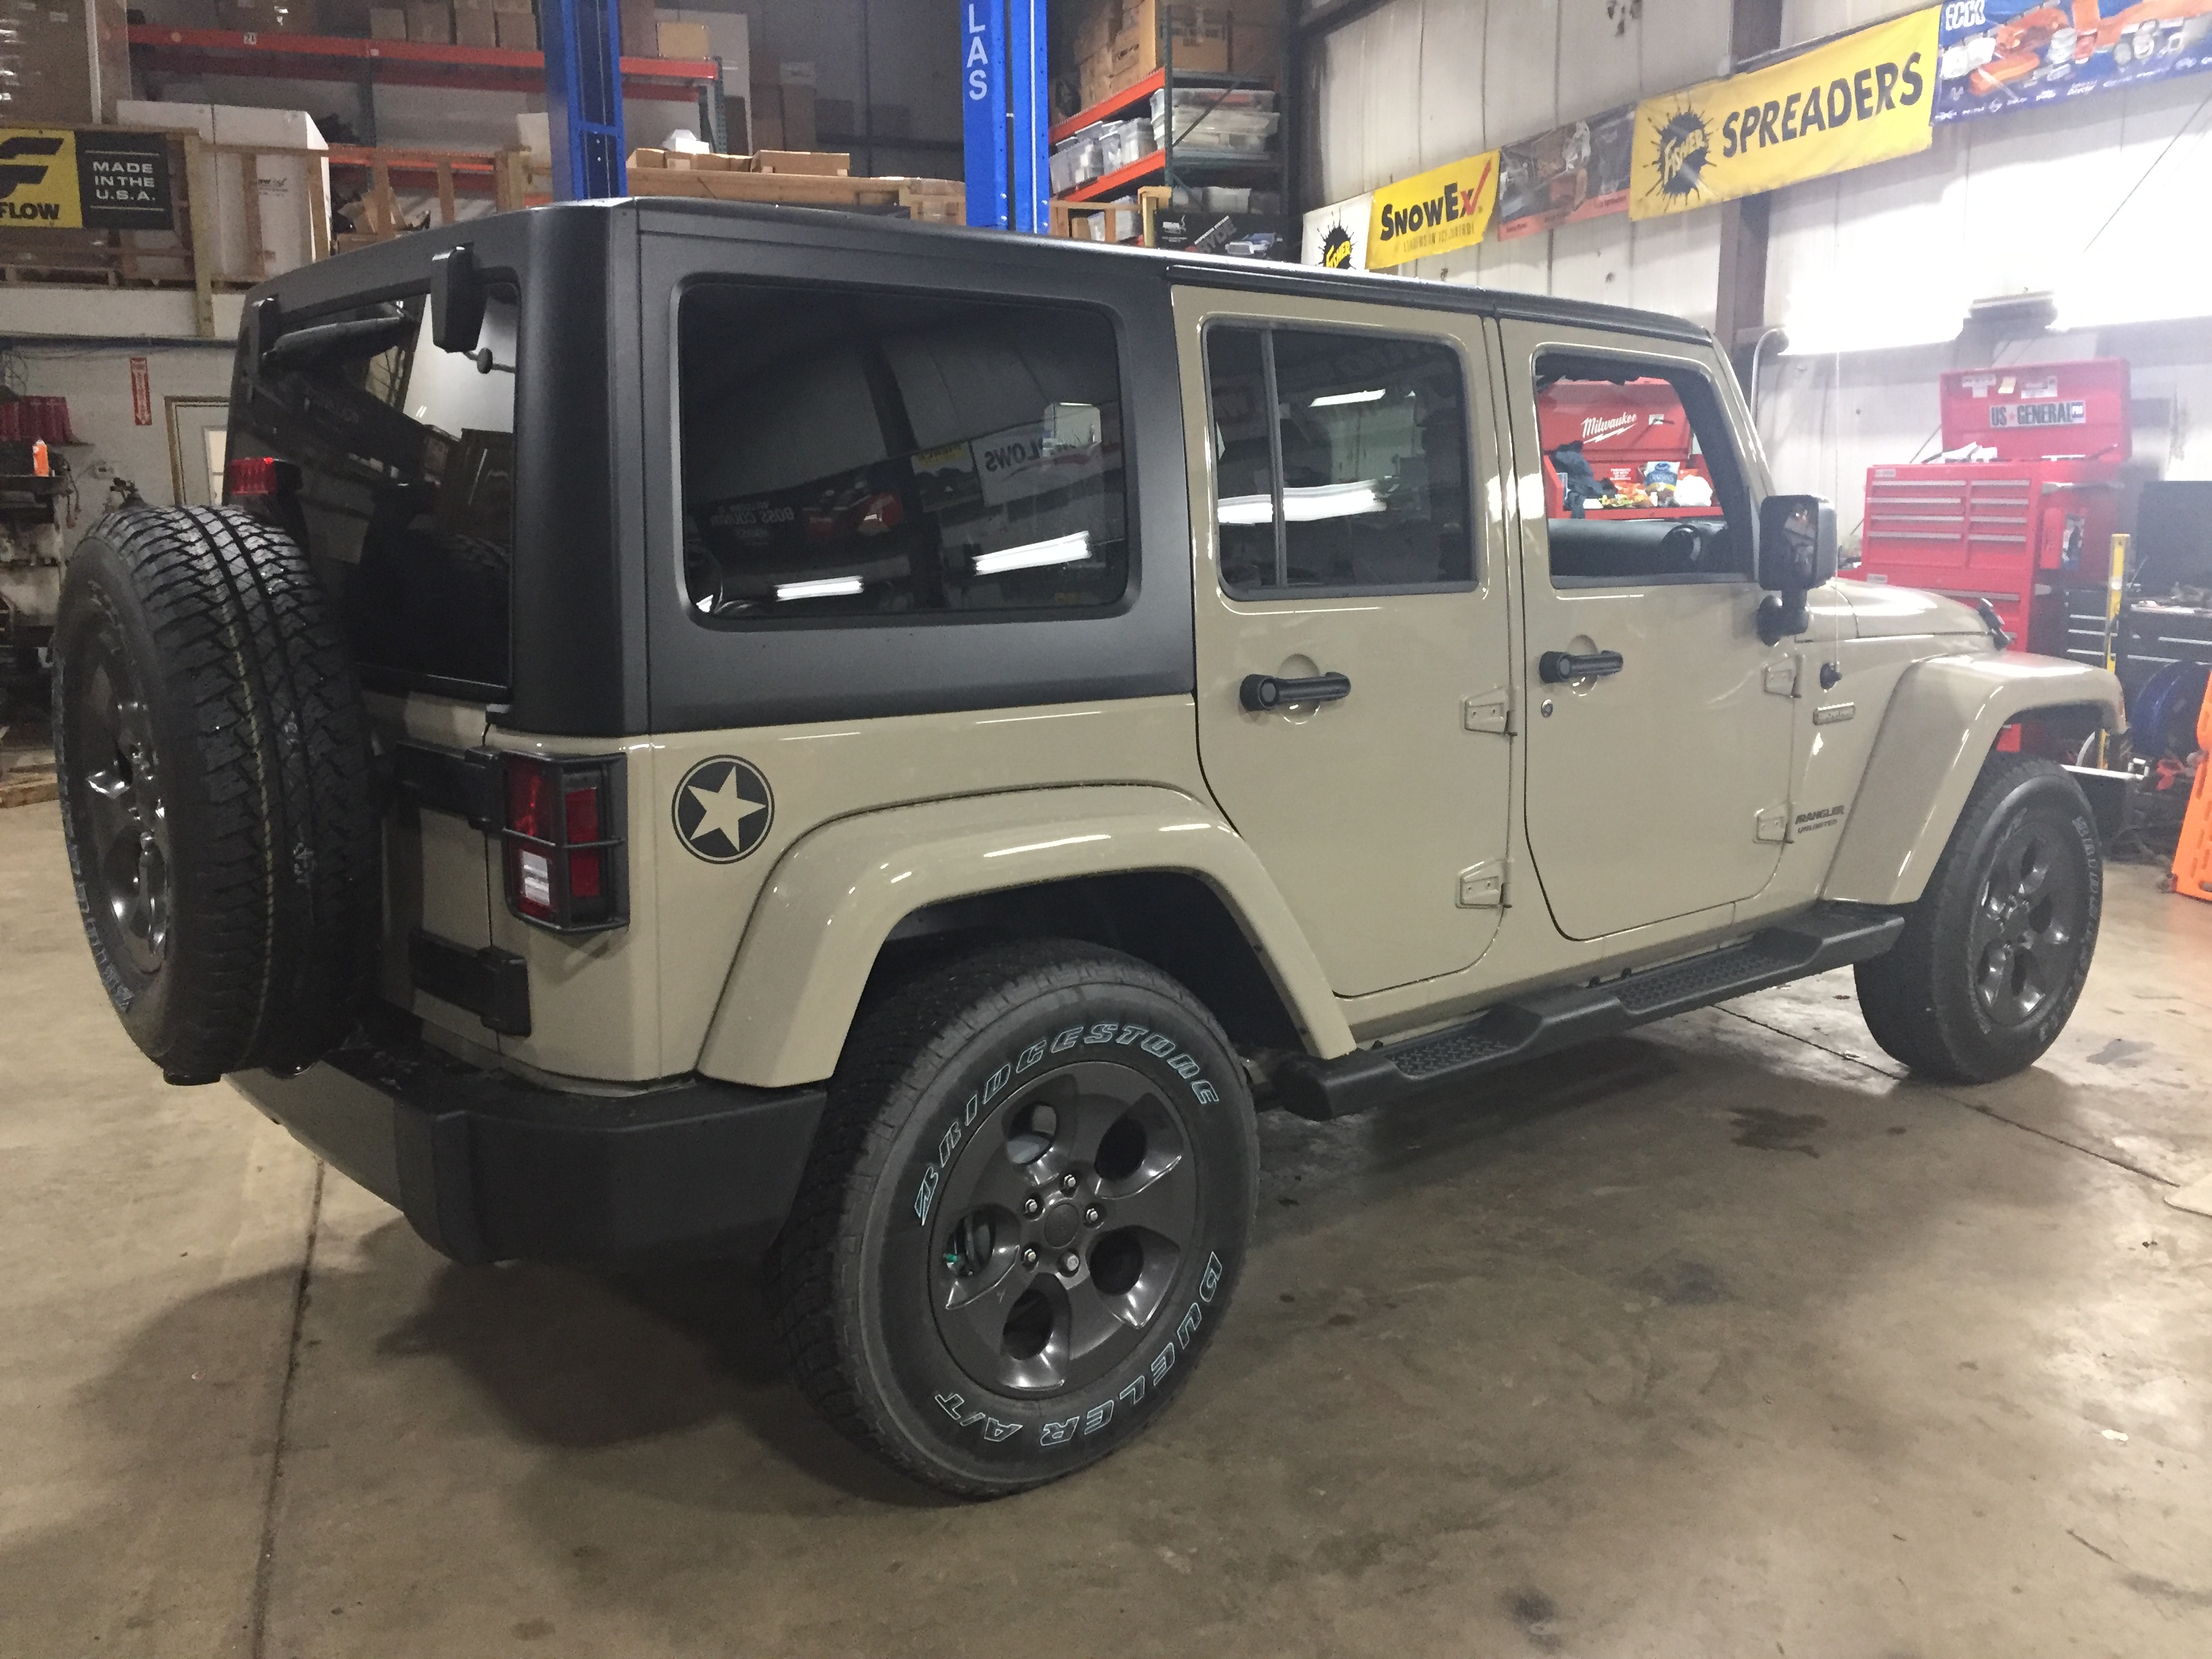 Jeep before lift kit installation